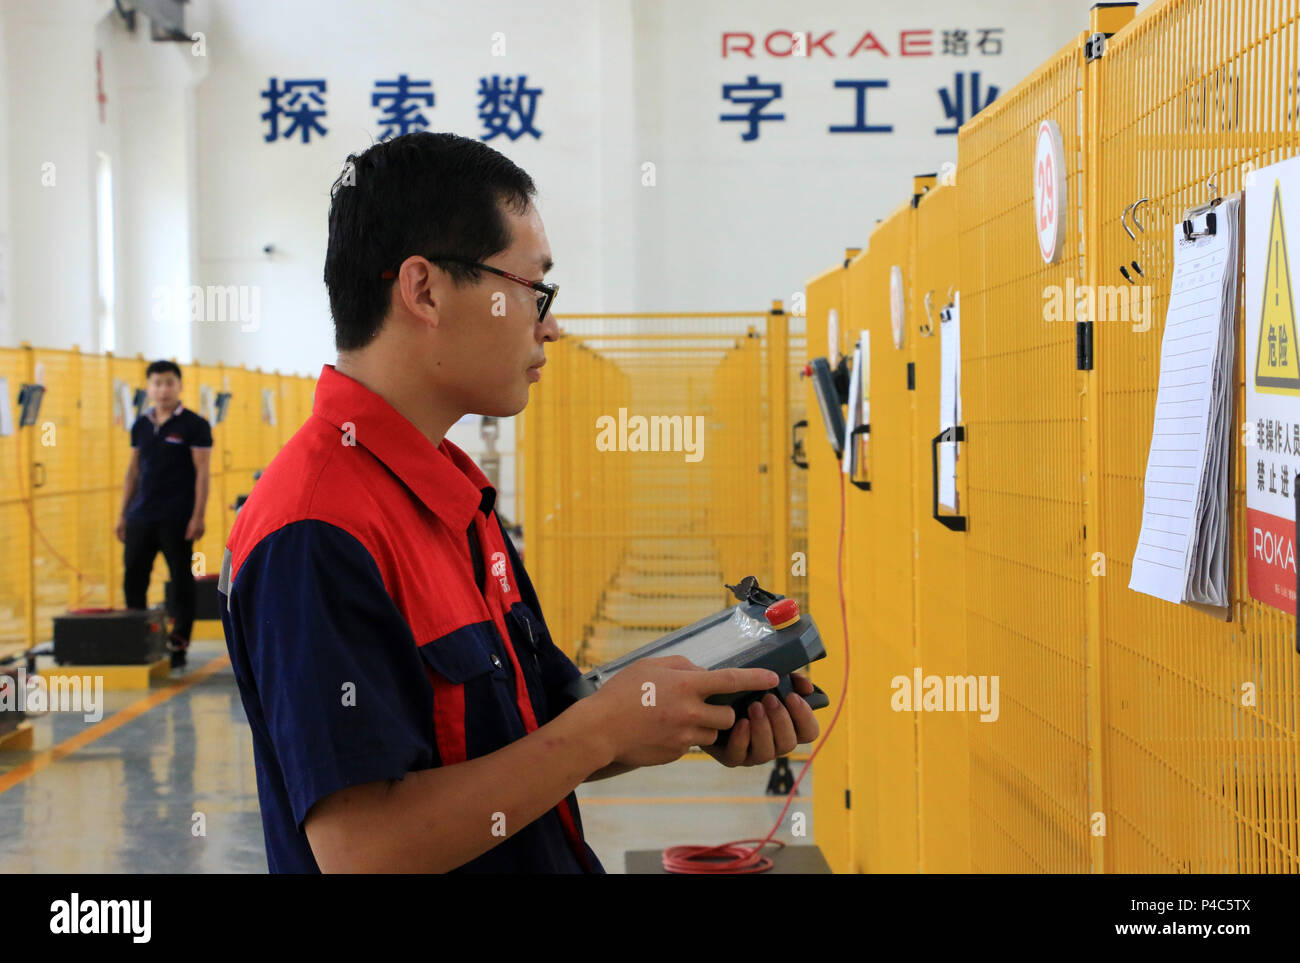 Zoucheng, China. 20th June, 2018. Numerous robots can be seen at the largest base of robot manufacturing in Zoucheng, east China's Shandong Province.ITORIAL USE ONLY. CHINA OUT) Credit: SIPA ASIA/Pacific Press/Alamy Live News Stock Photo